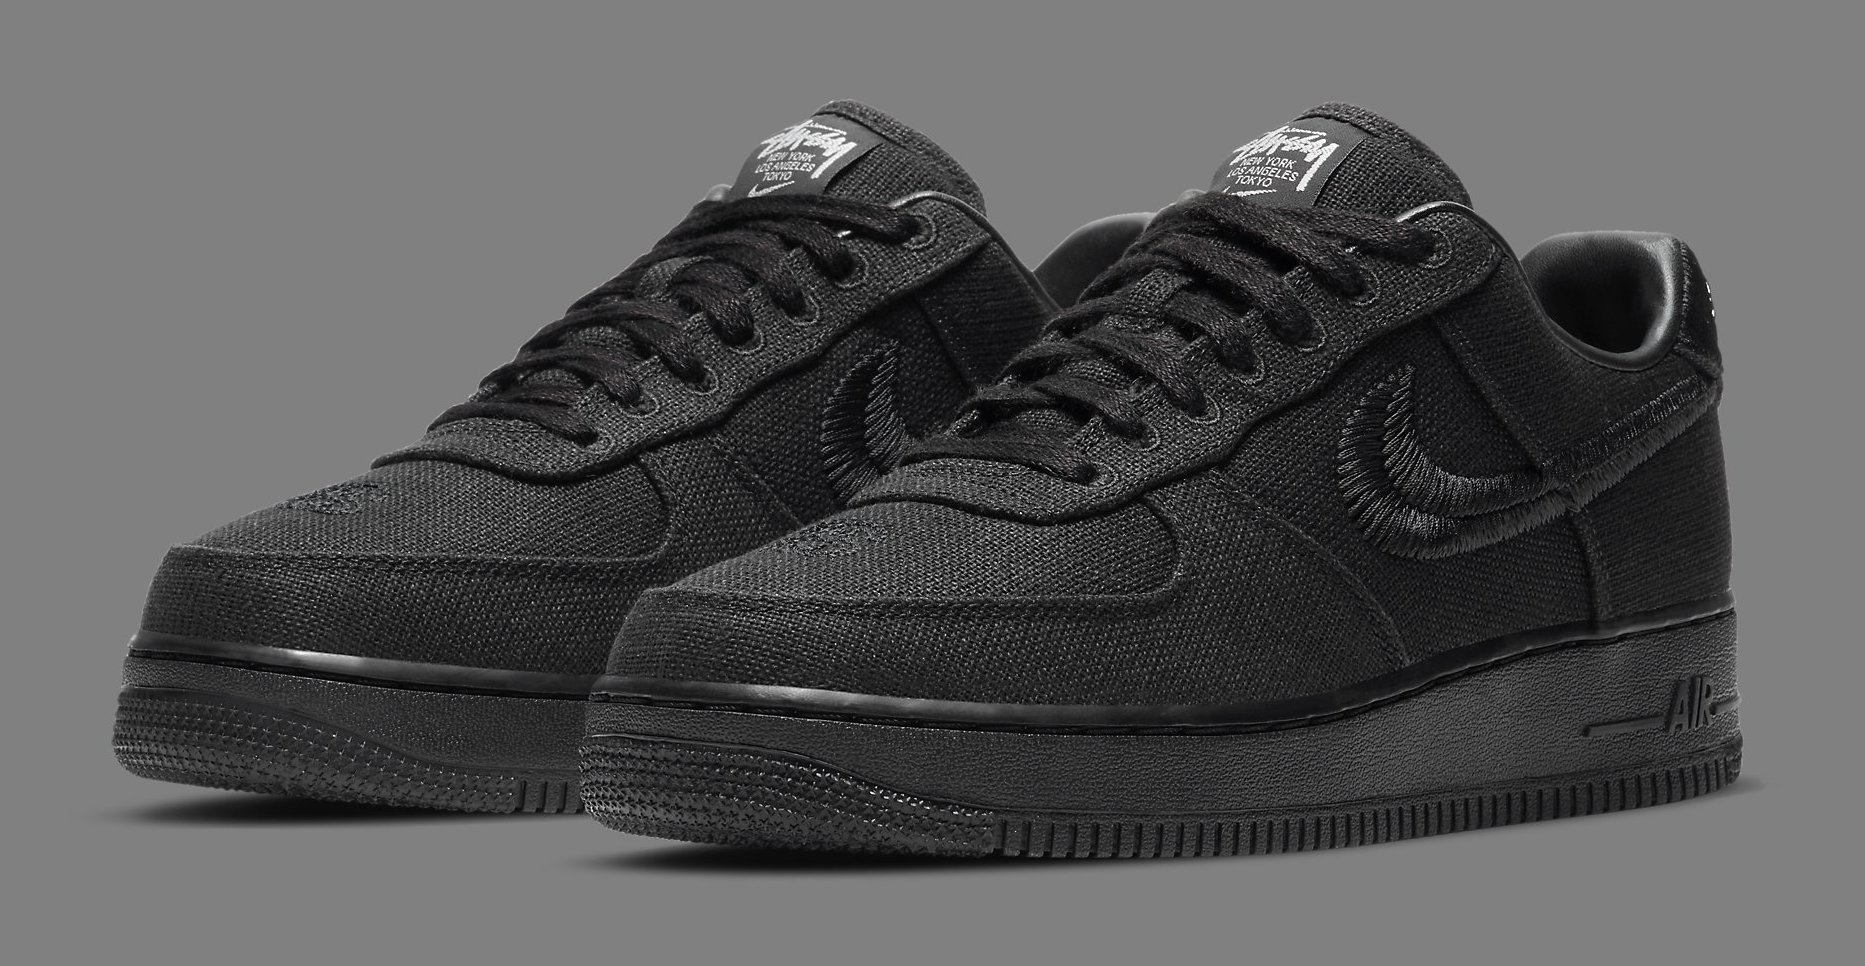 Stussy's Sold-Out Nike Air Force 1 Is Releasing Again | Complex